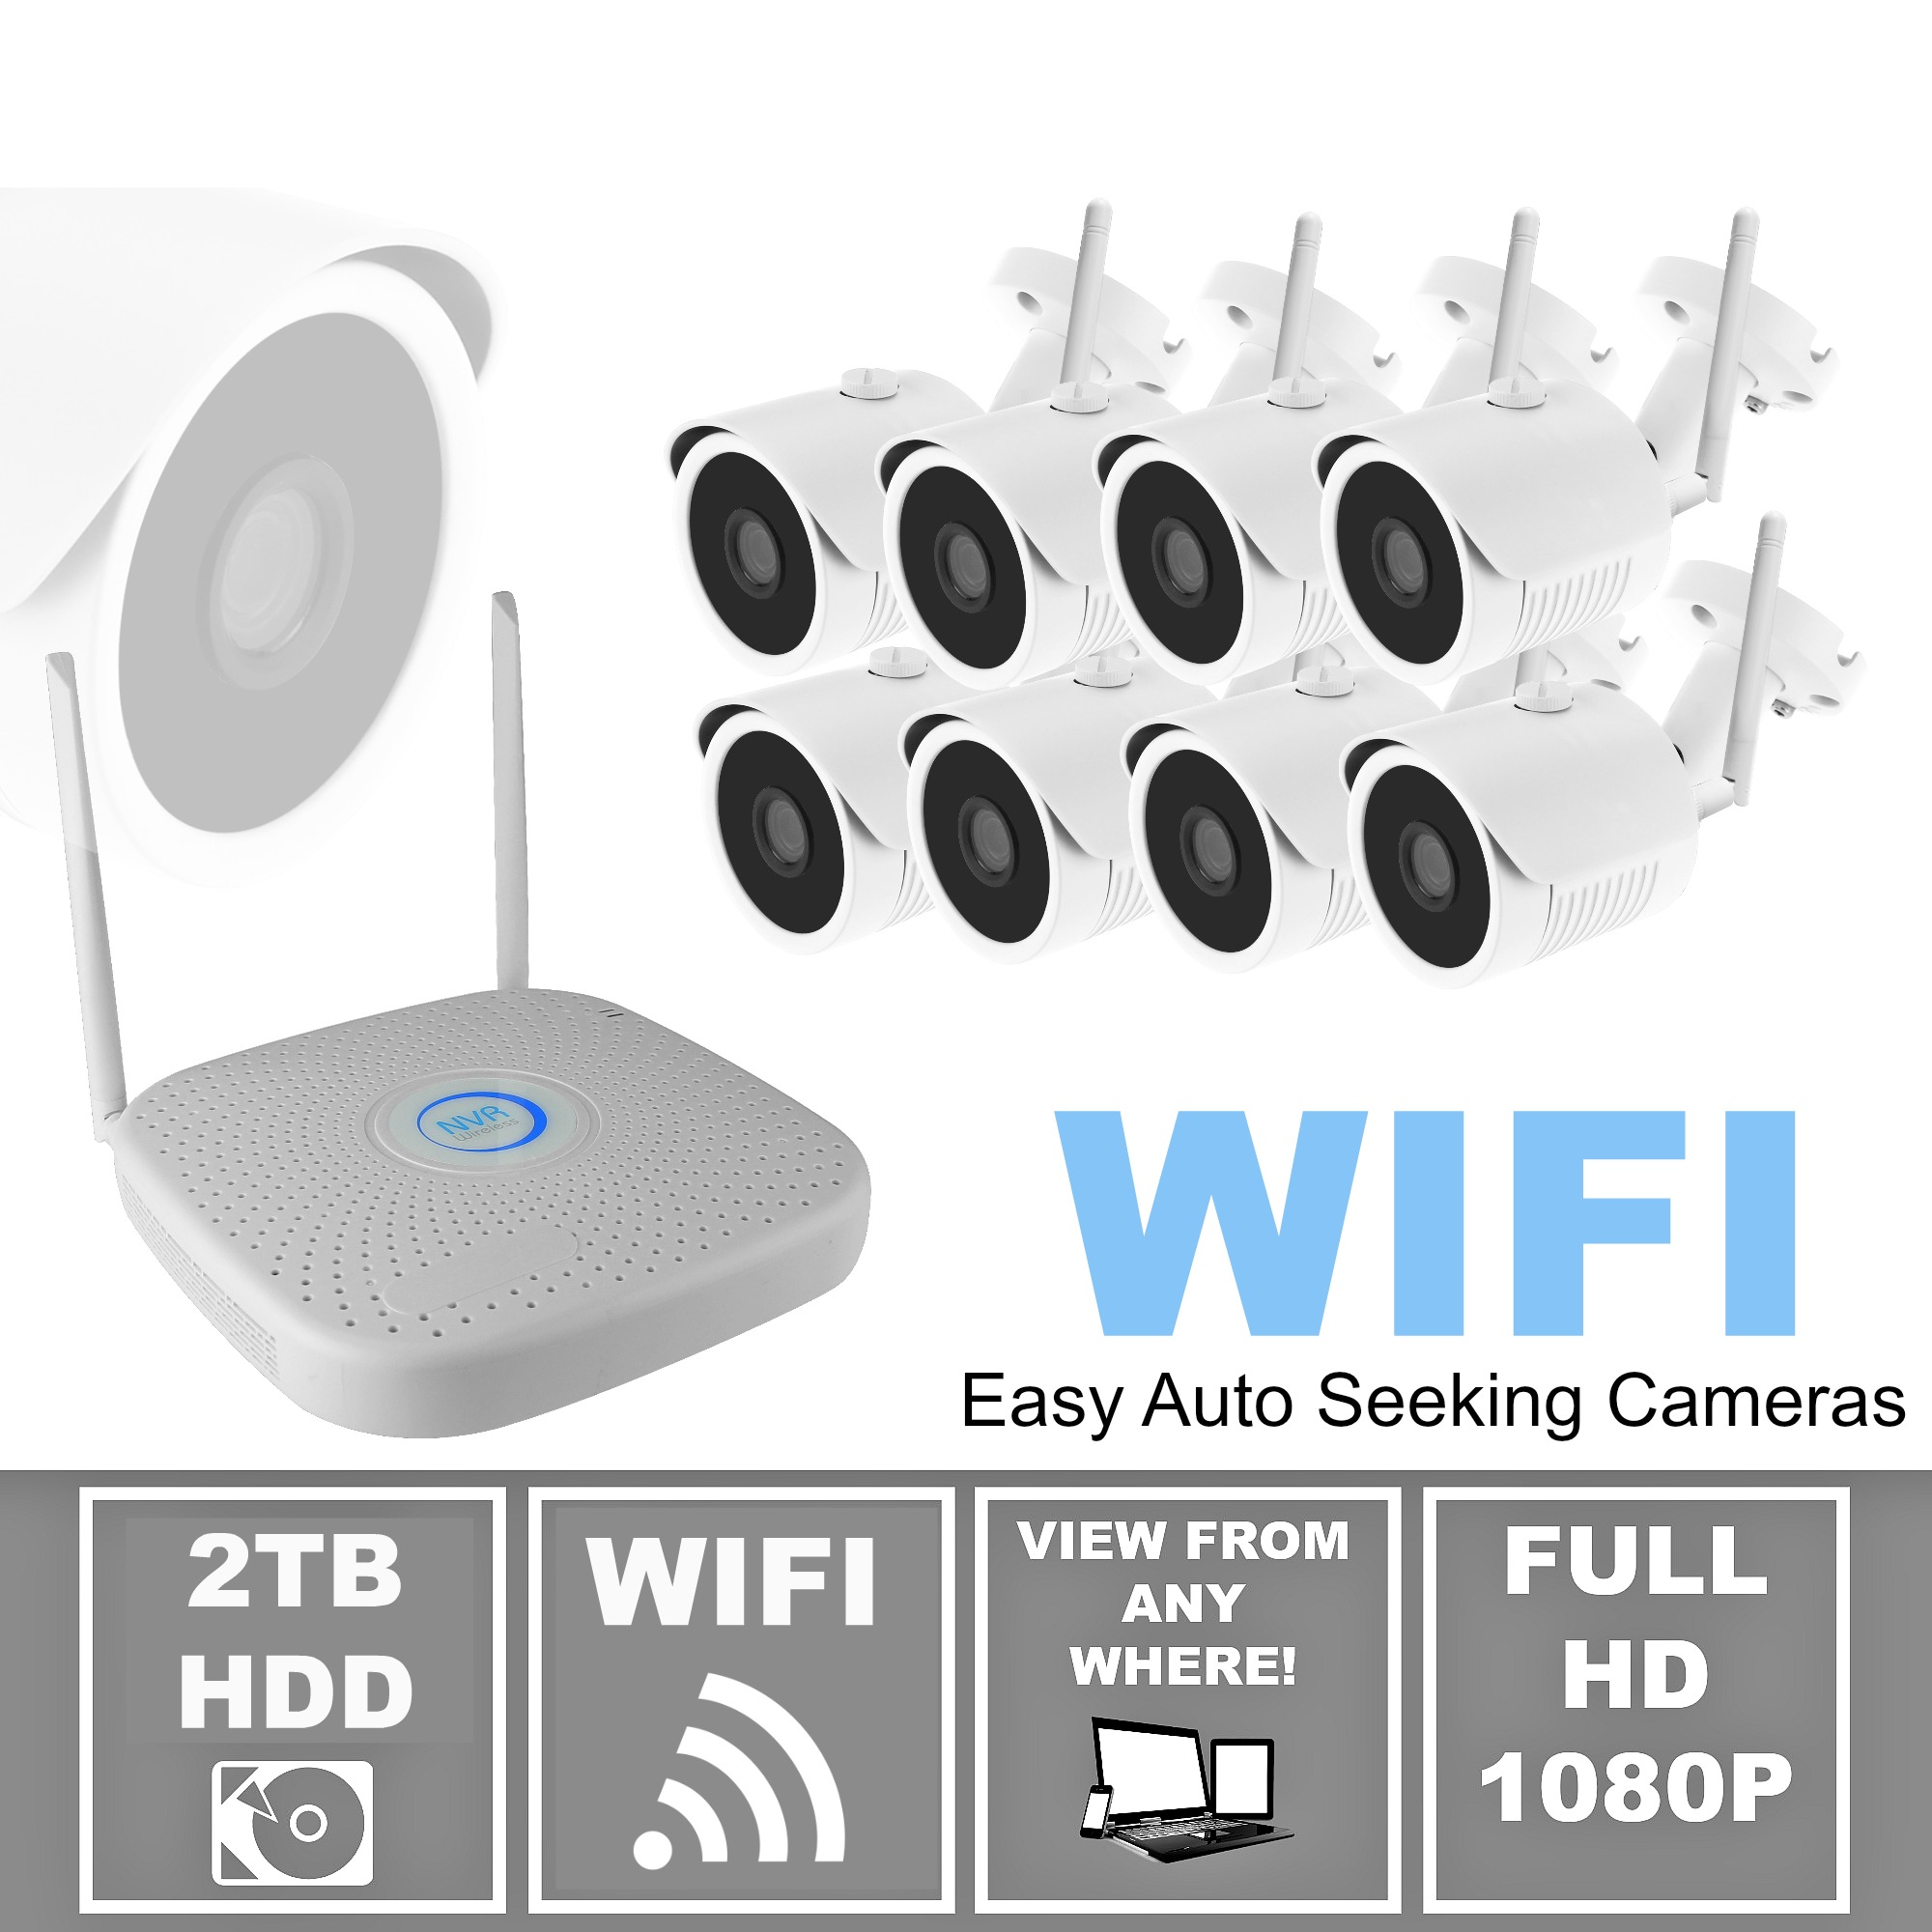 8 camera wireless security system